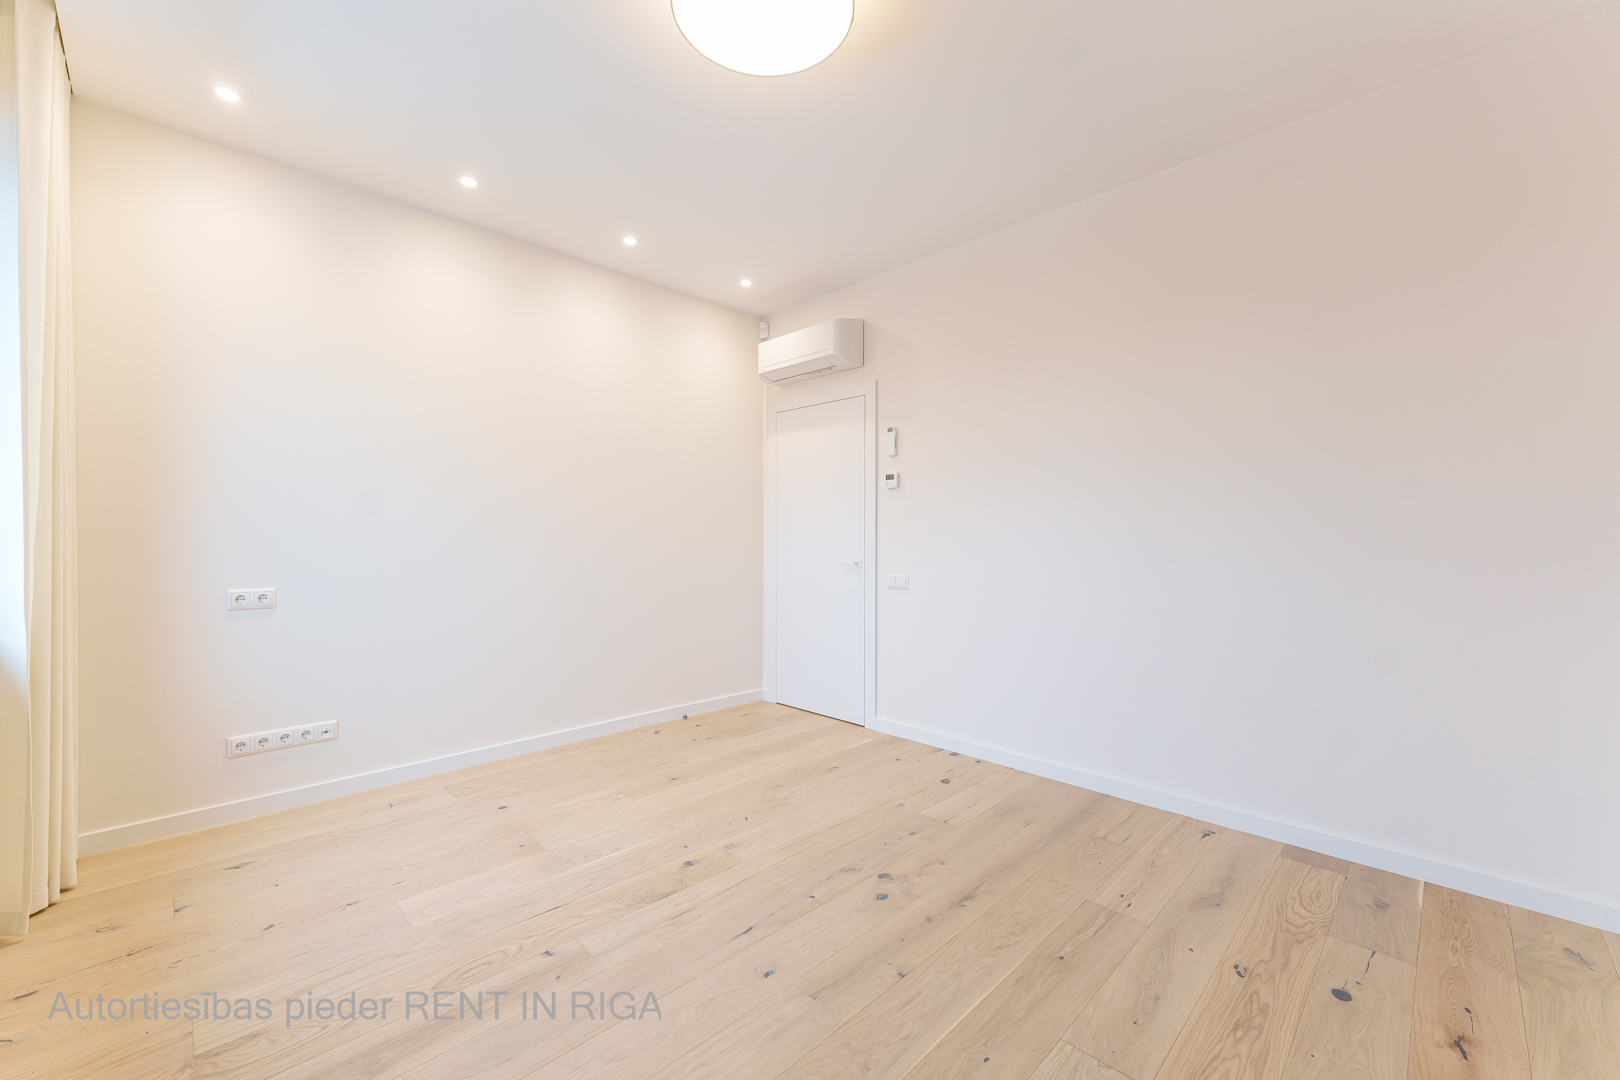 House for rent, Jomas street - Image 1